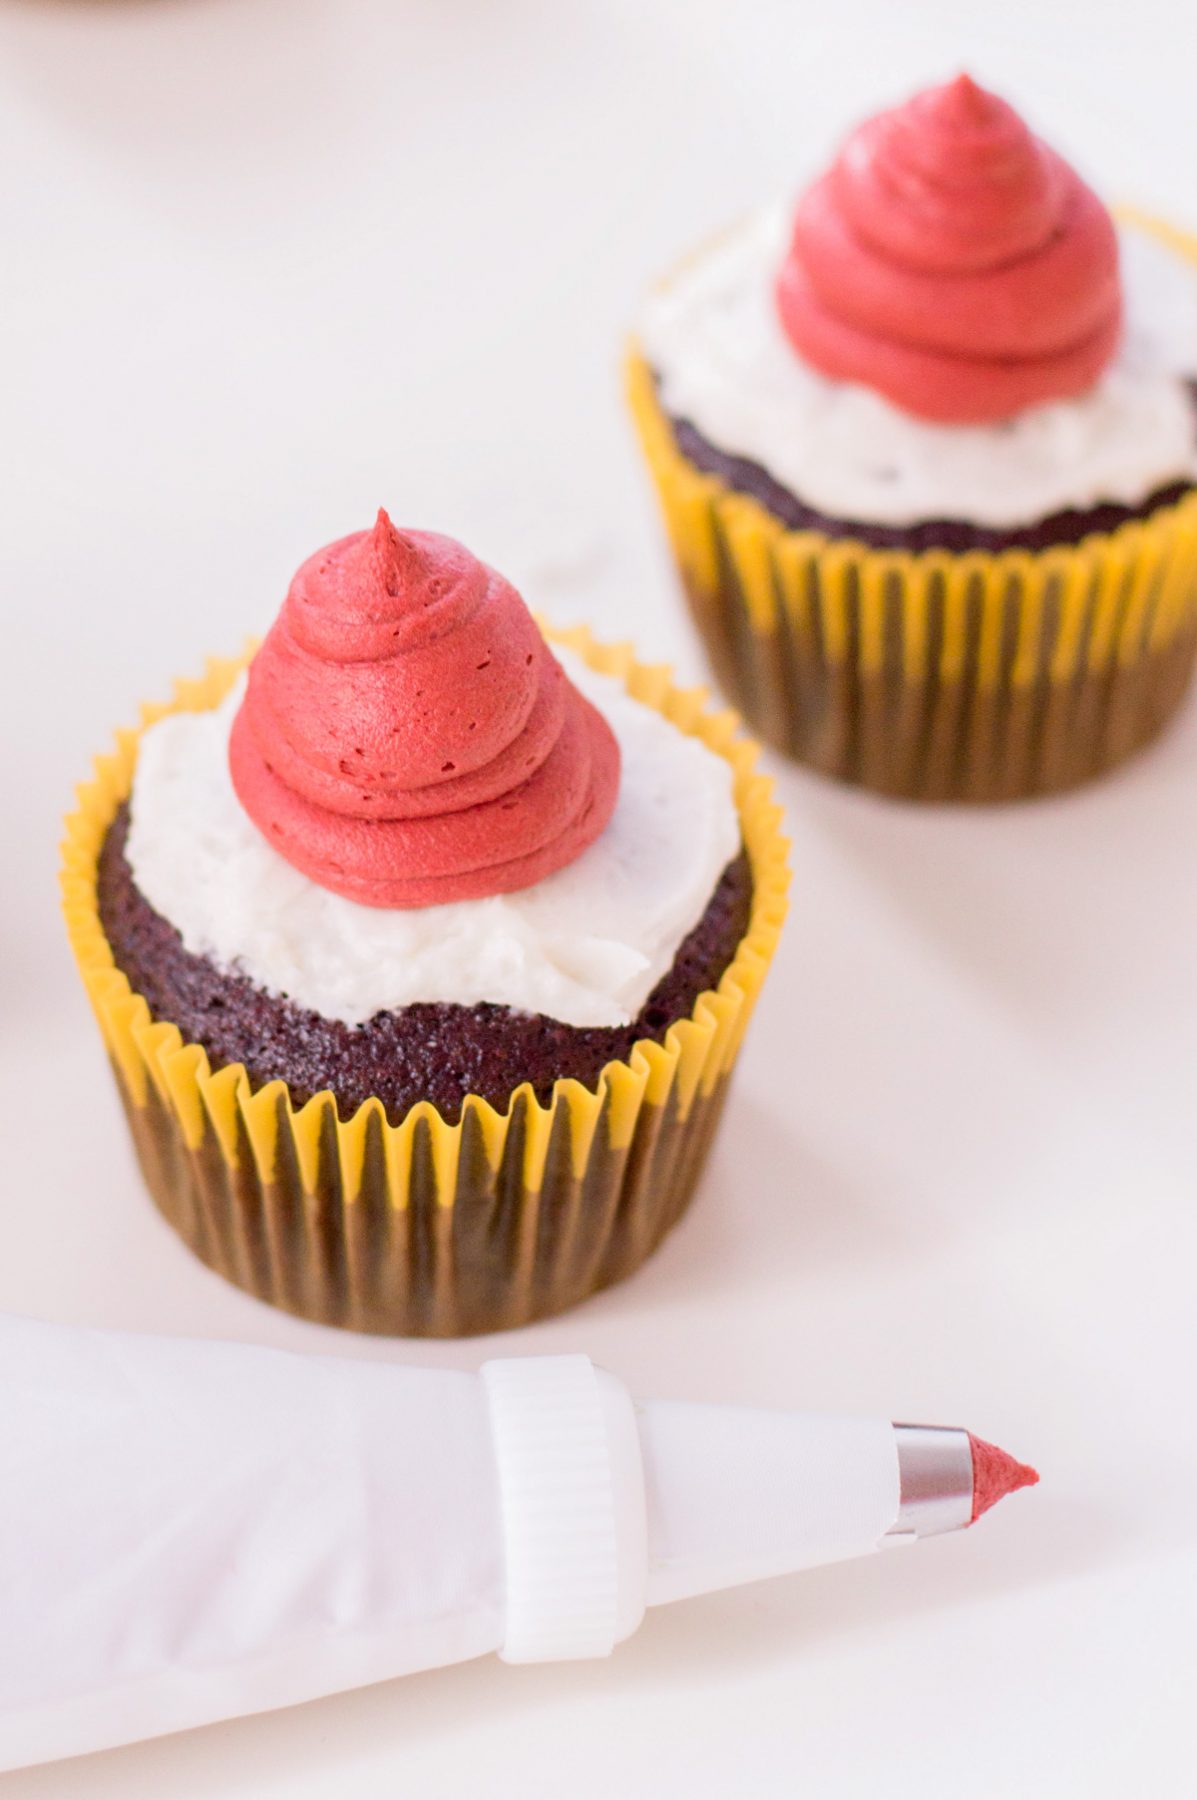 dollop of red frosting to mimic a Santa hat